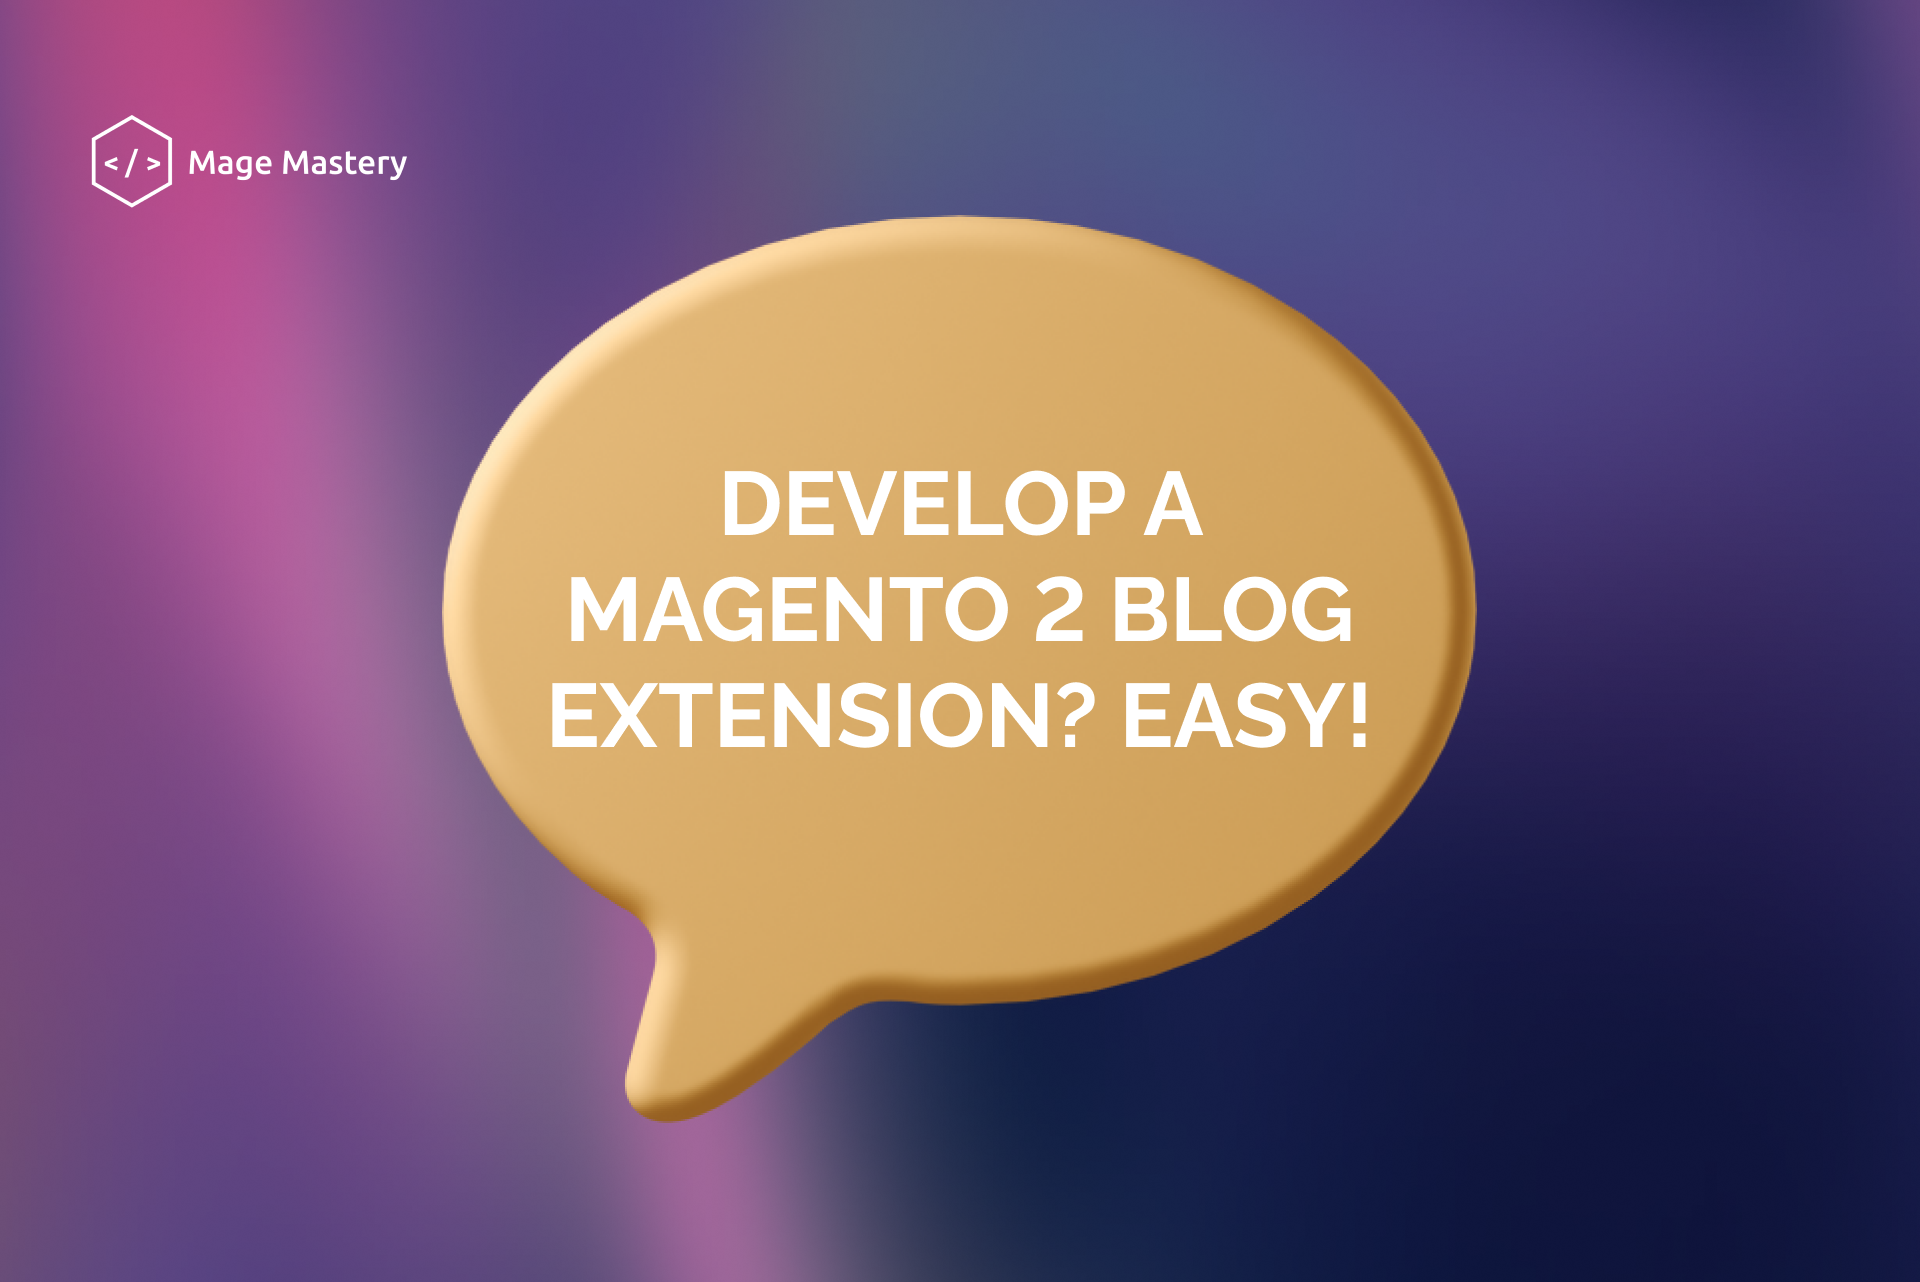 How to create a Magento 2 Blog Extension in 4 steps?